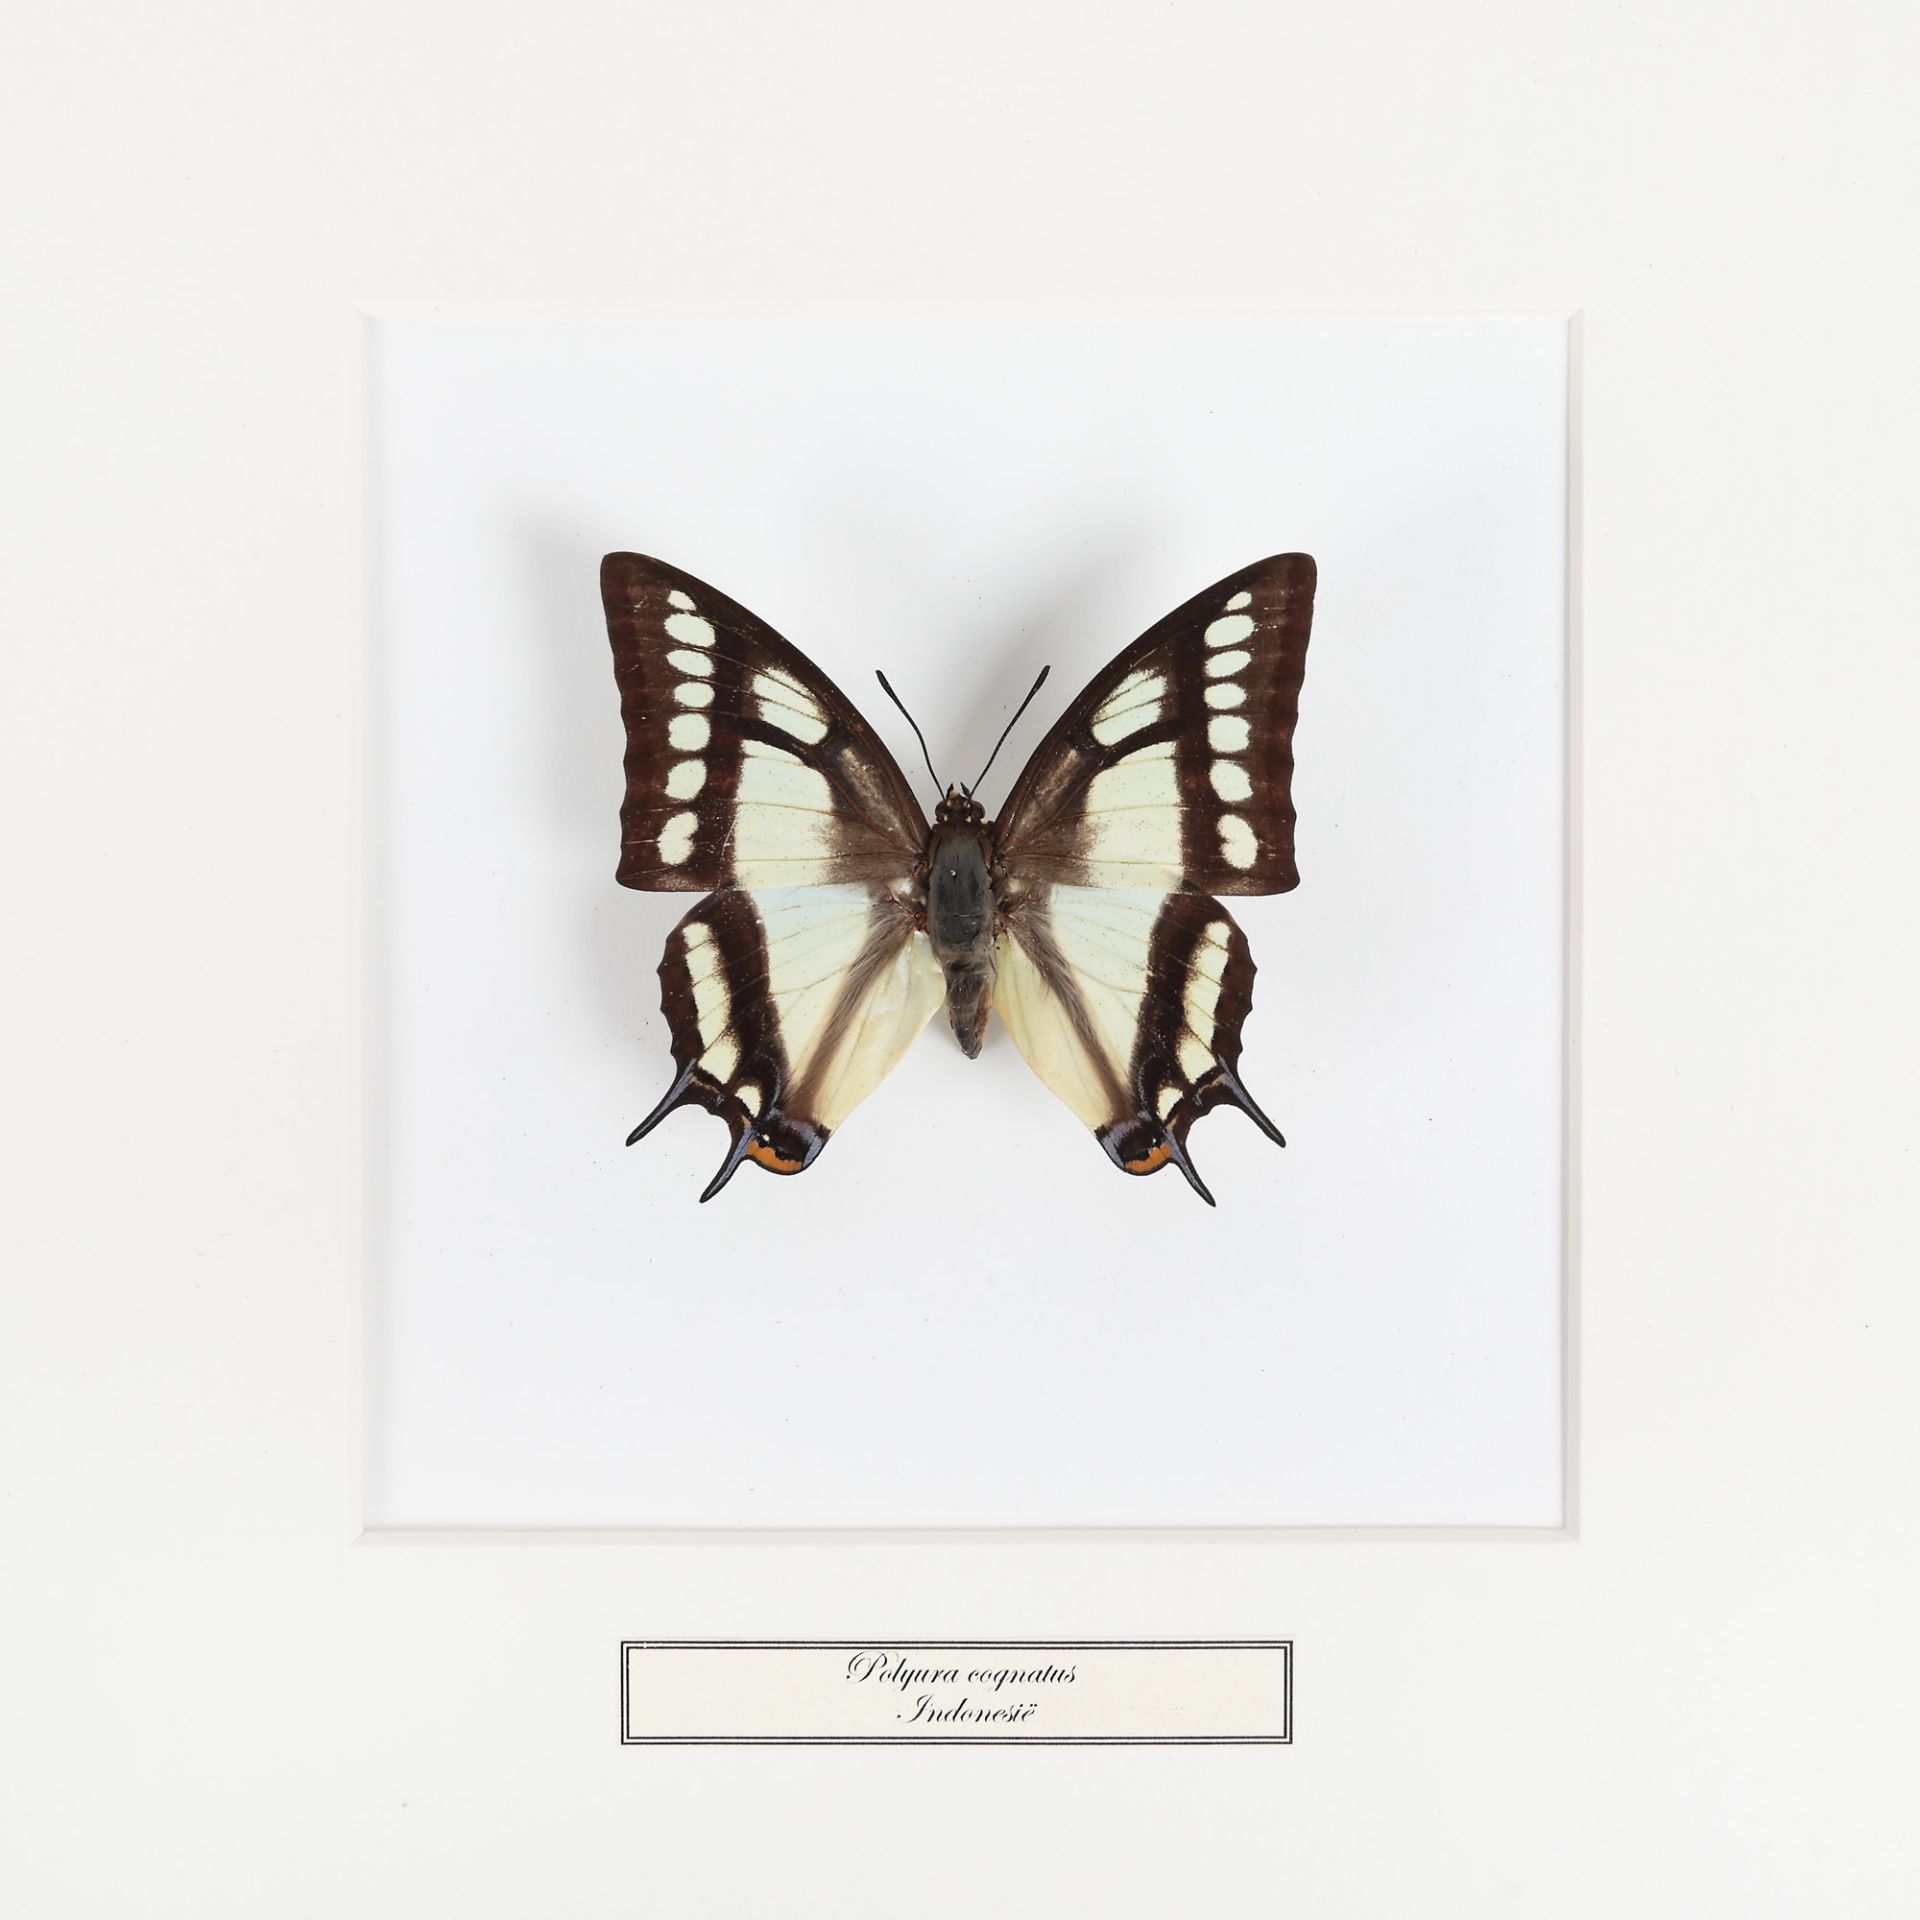 Five plates with exotic butterflies, Southeast Asia and South America - Image 4 of 6